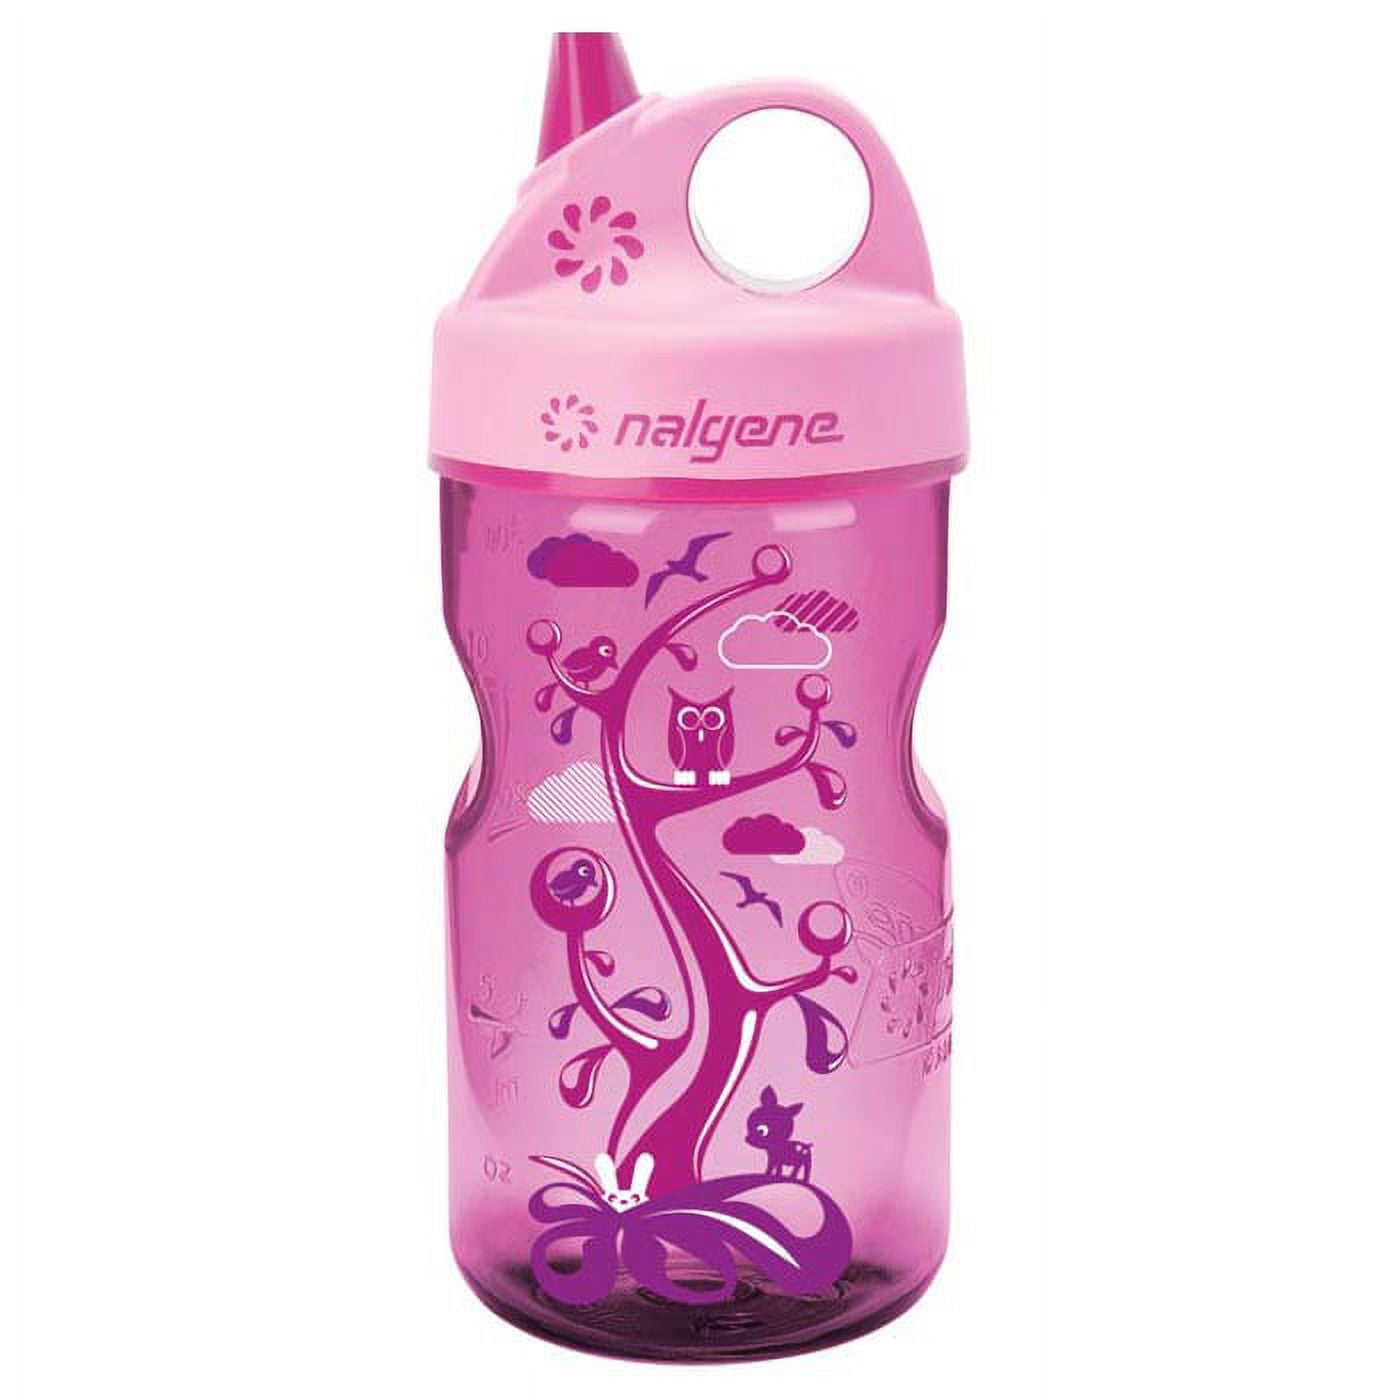  MEM WORLDSHOP Sustainable Tritan Grip-N-Gulp Water Bottle, 12  oz - 2 Pack (Purple) - Grip-N-Gulp Water Bottles, Leak Proof Sippy Cup,  Durable, Dishwasher Safe, Reusable and Sustainable, 12 Ounces : Baby